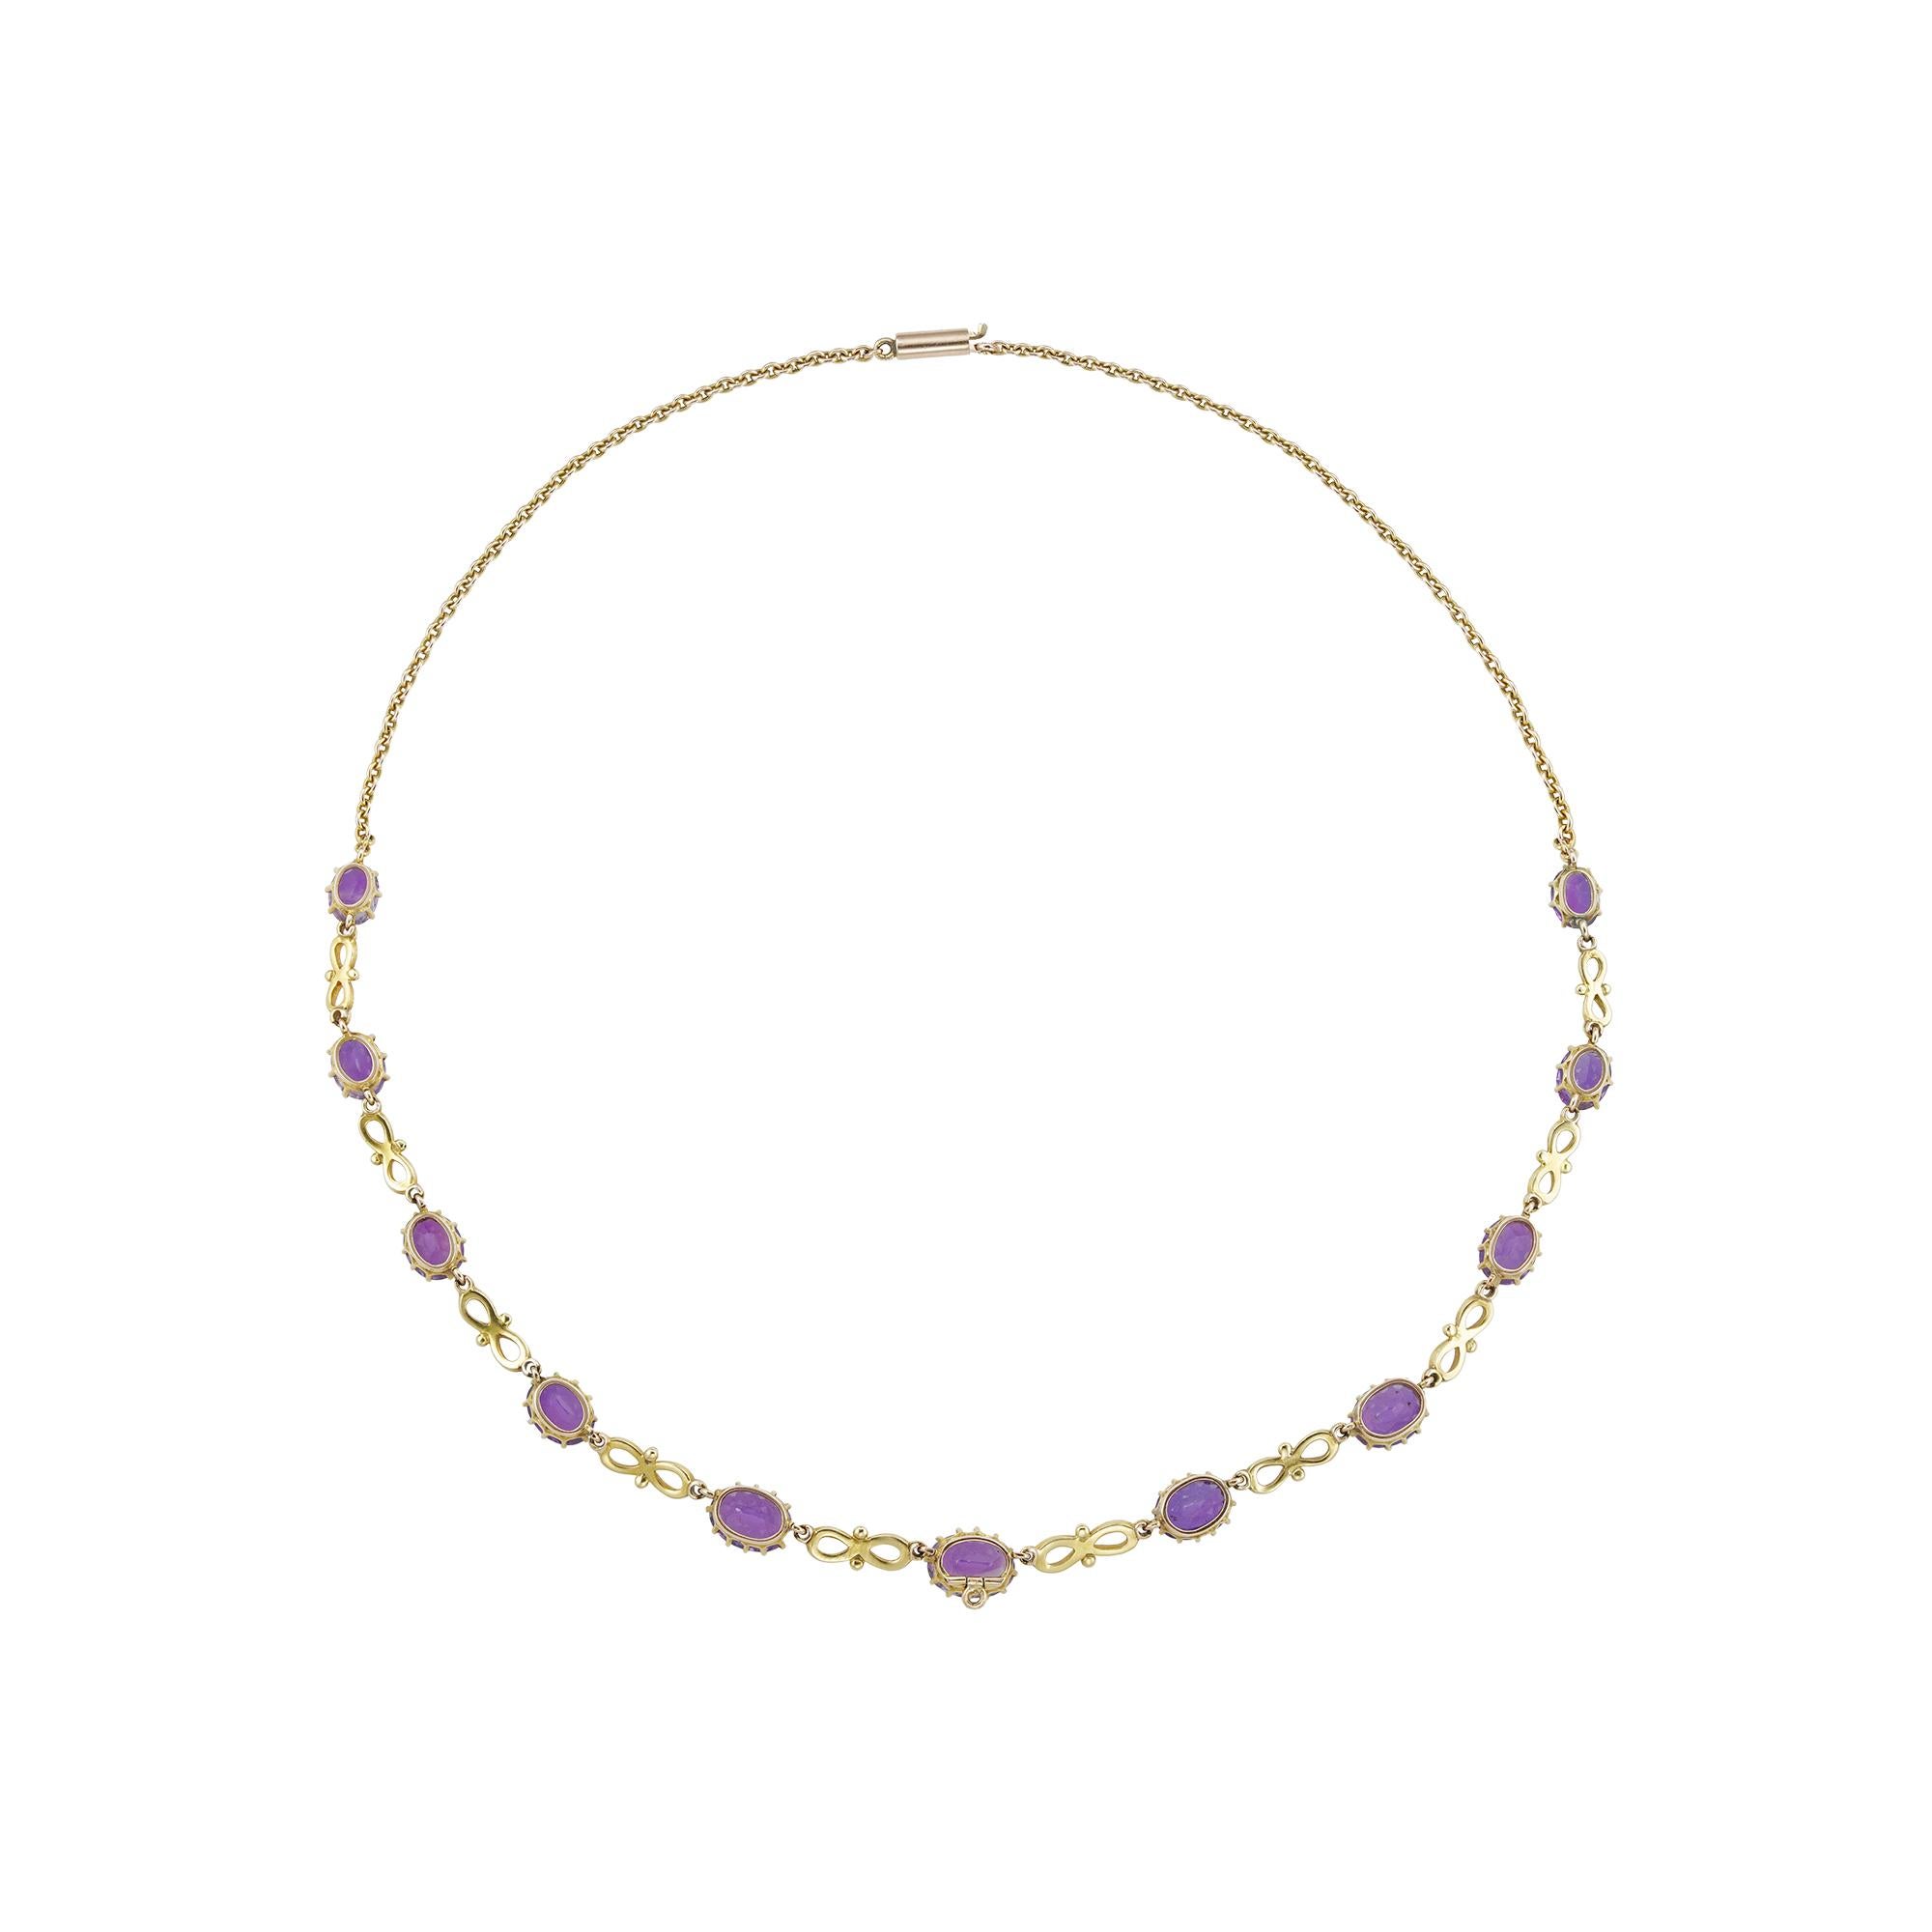 A suffragette amethyst and enamel necklace, consisting of eleven oval faceted amethysts graduating from the centre, connected with ten figure-of-eight white and green links, and suspended by a gold trace chain, the amethysts estimated to weigh 10.5